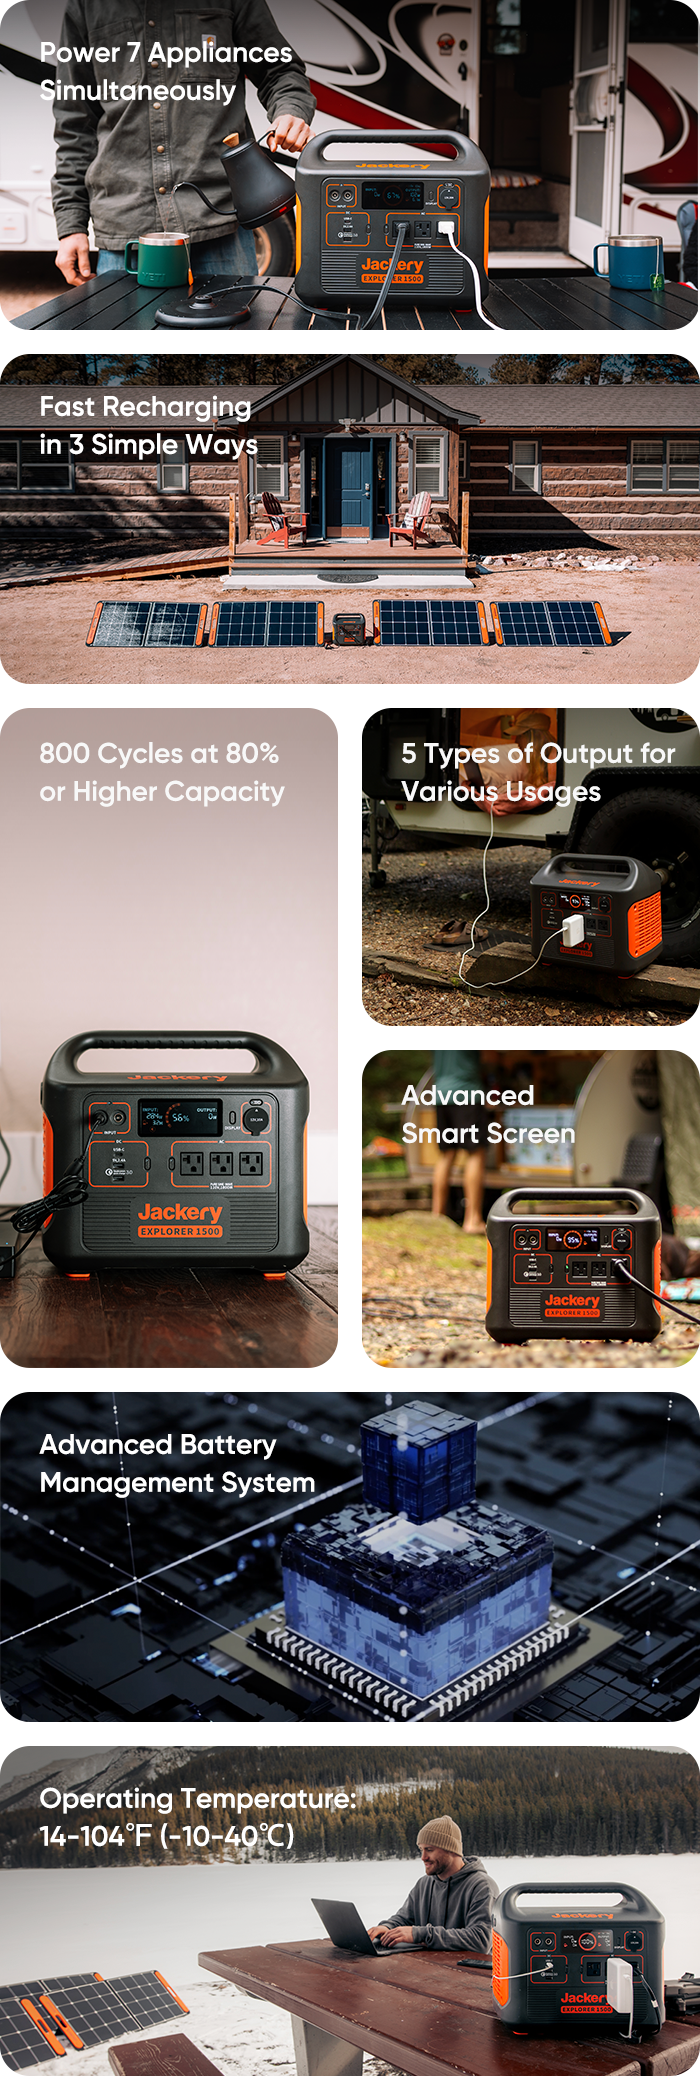 VTOMAN Expandable Solar Generator 1500W with 2X 100W Solar Panels, 1548Wh  LiFePO4 Battery Portable Power Station, Portable Backup Power Supply for  Home Emergency, Outdoor Camping, Road Trip - Coupon Codes, Promo Codes